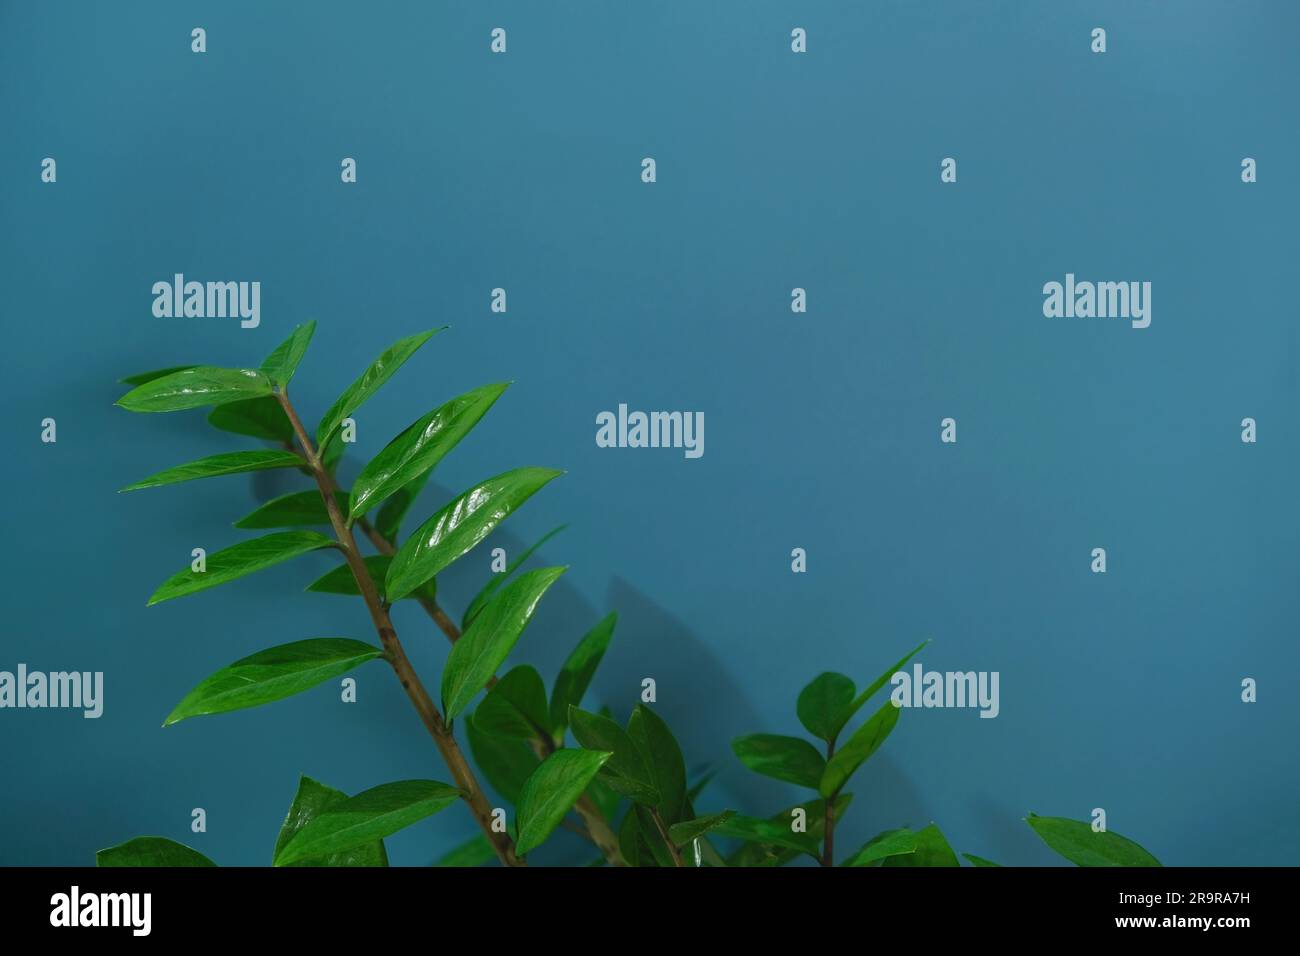 Branches and leaves of zamiokulkas on a blue background. The concept of minimalism. Stylish and minimalistic urban jungle interior. The poster. Selective Focus Stock Photo